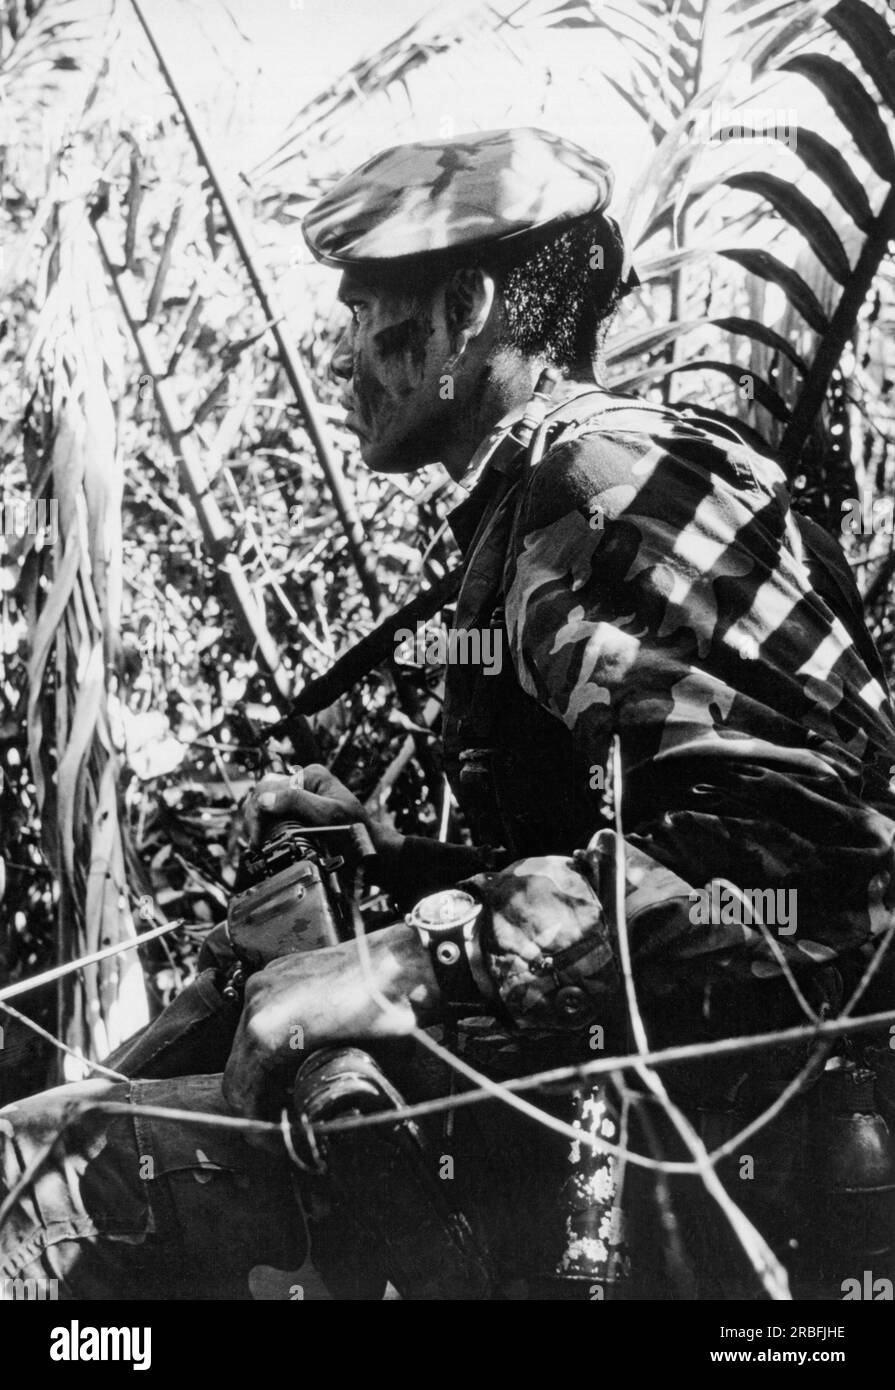 Mekong Delta, Vietnam:  January, 1969 A Navy SEAL with his face camouflaged in grease paint watches intently for any sign of Viet Cong activity during a search and destroy mission. Stock Photo